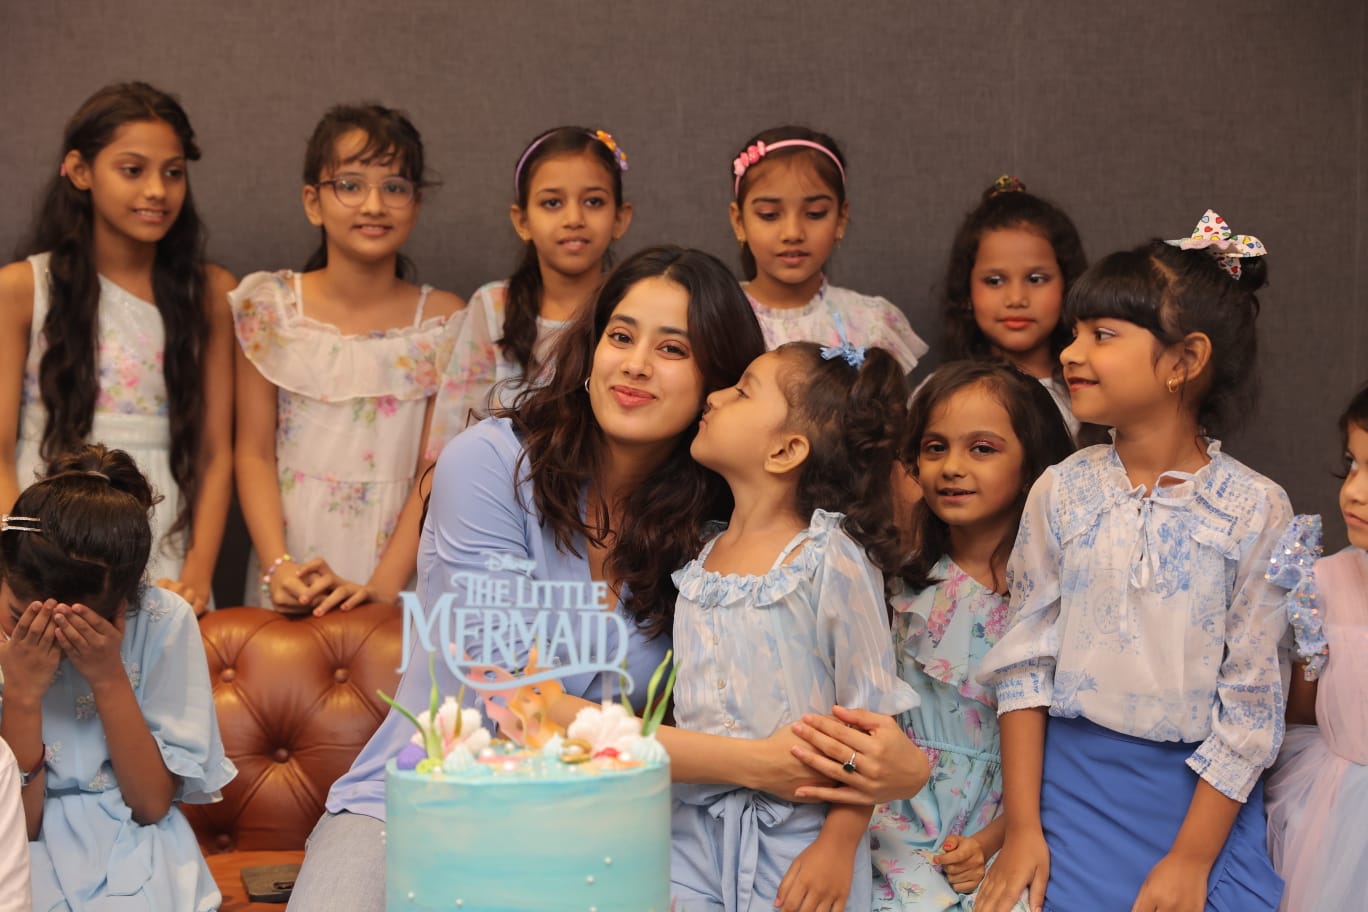 “I cannot wait to watch ‘The Little Mermaid’ and relive my childhood with my girlfriends”, says Janhvi Kapoor!